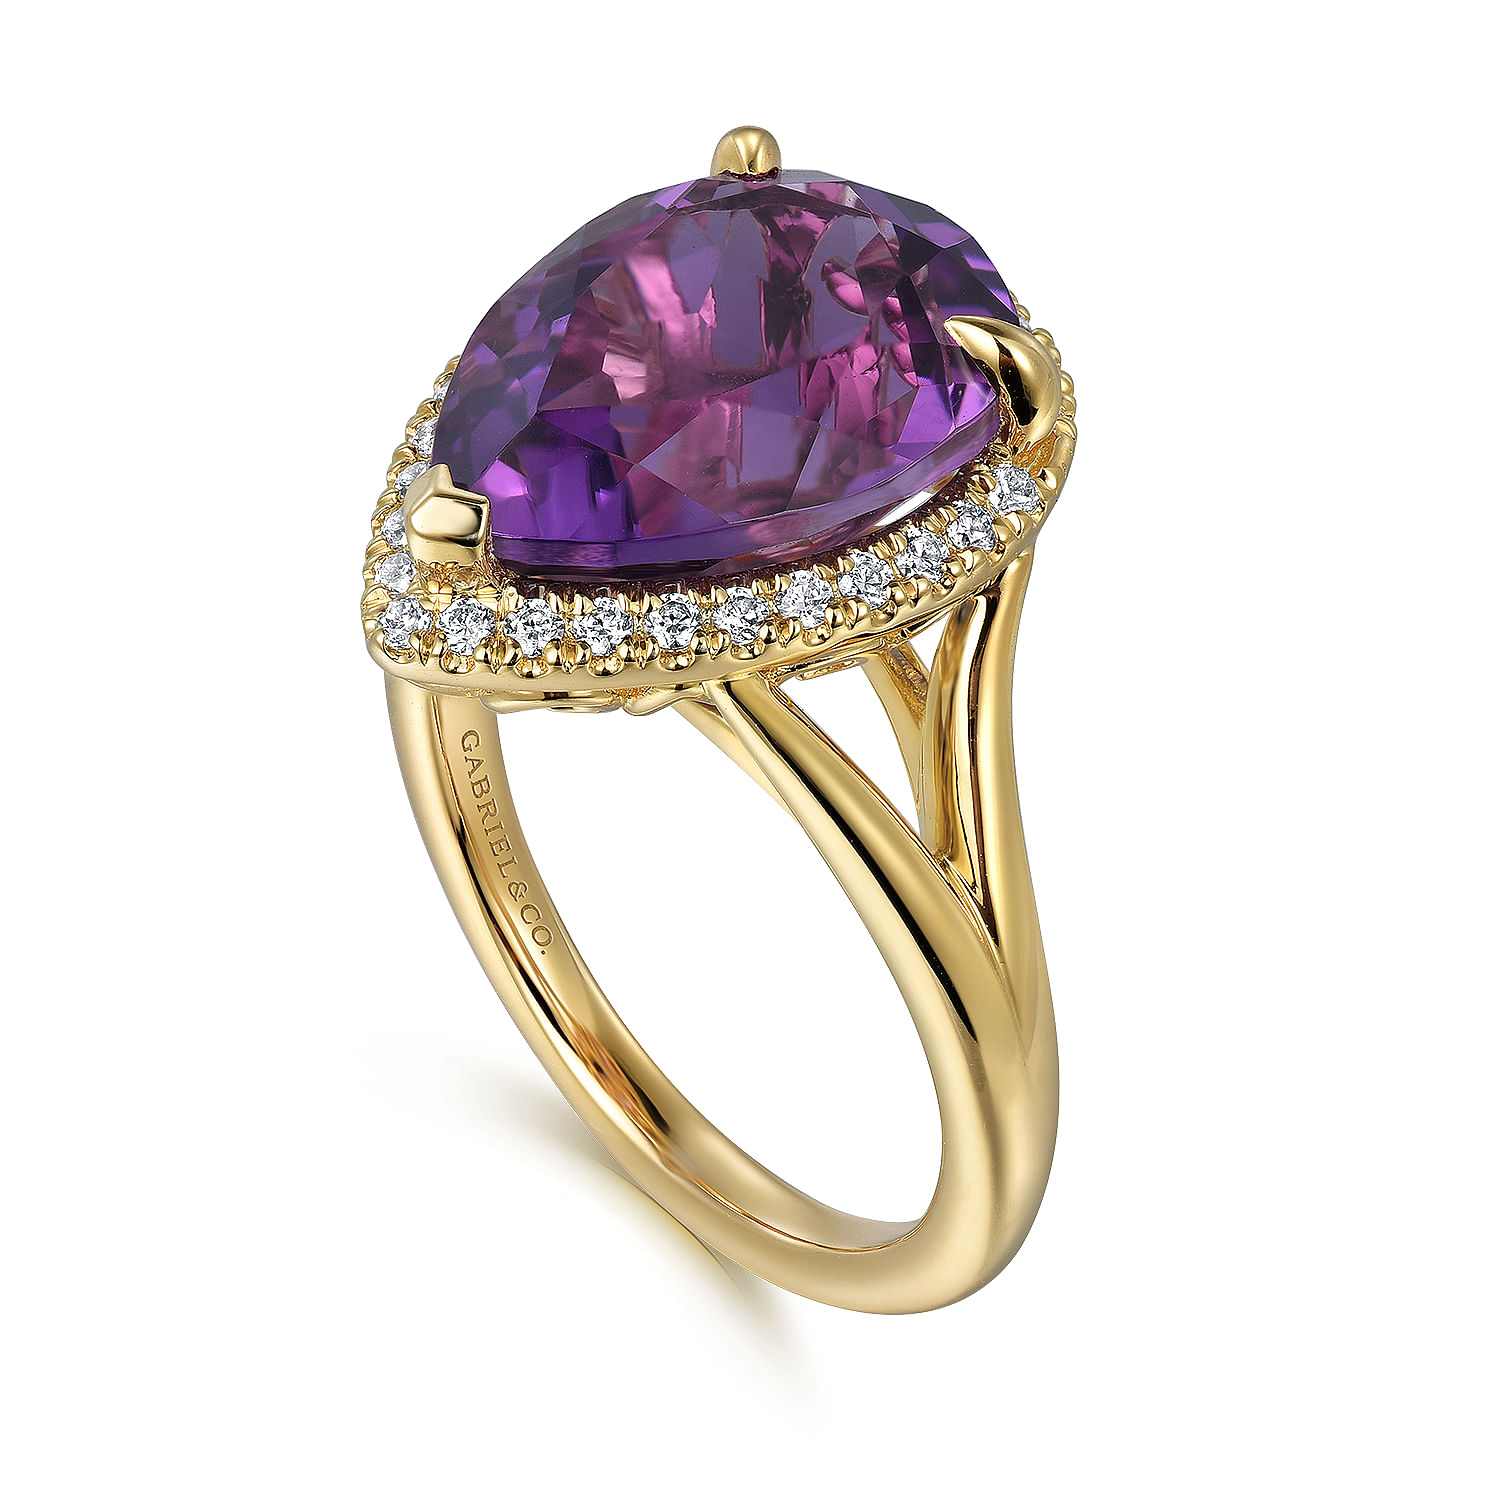 14K Yellow Gold Diamond and Flat Pear Shape Amethyst Ladies Ring With Flower Pattern Gallery - 0.21 ct - Shot 3